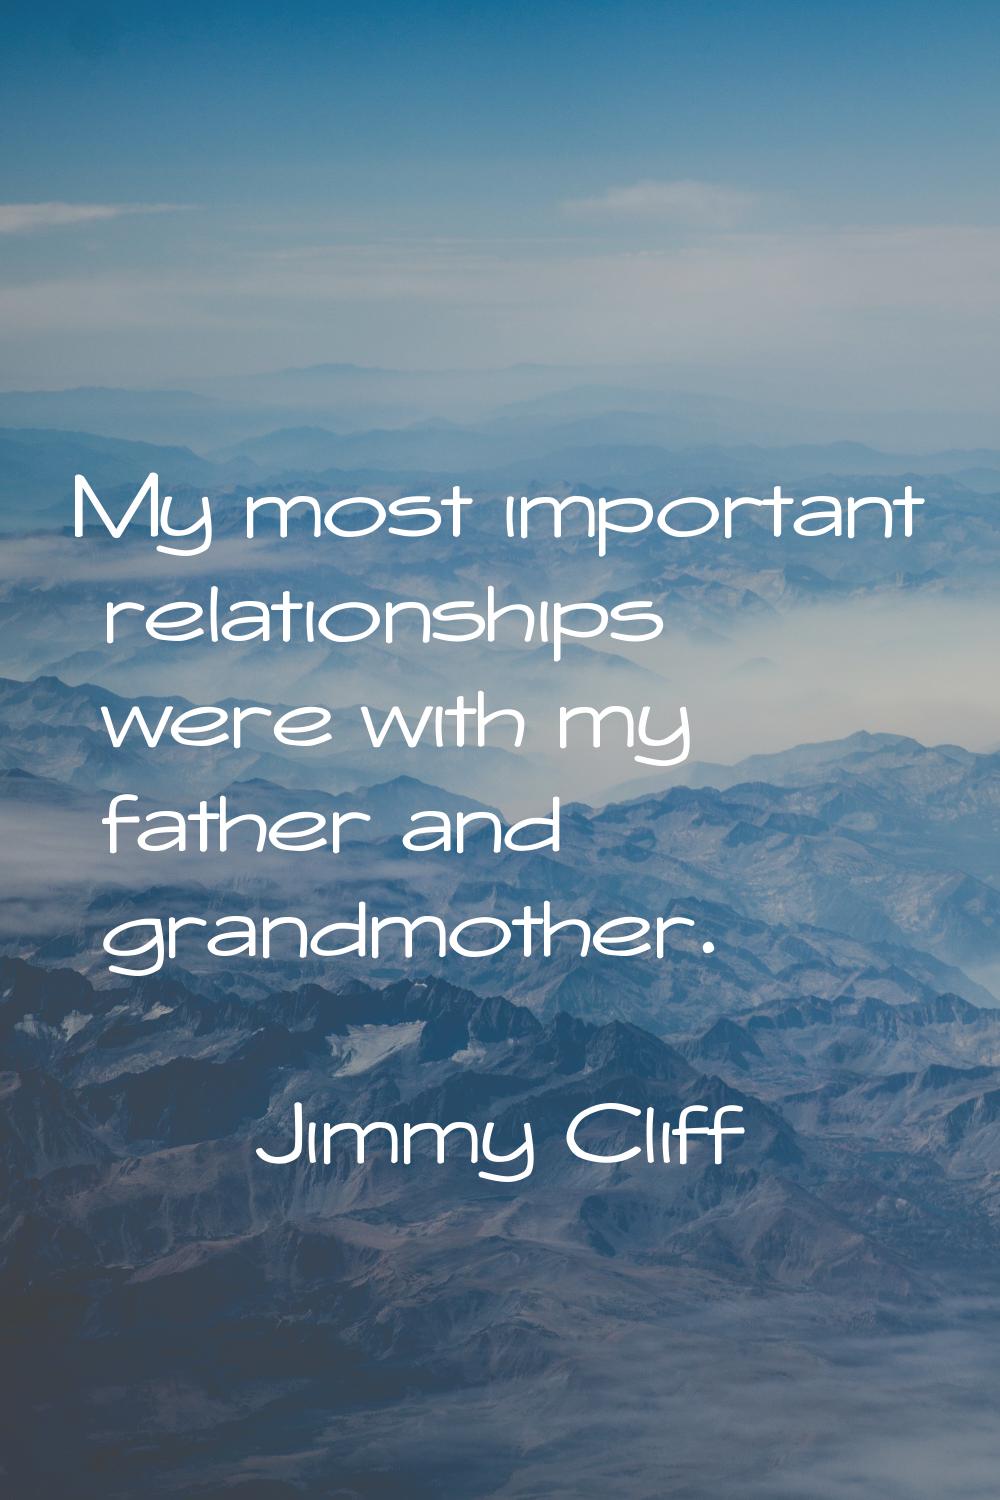 My most important relationships were with my father and grandmother.